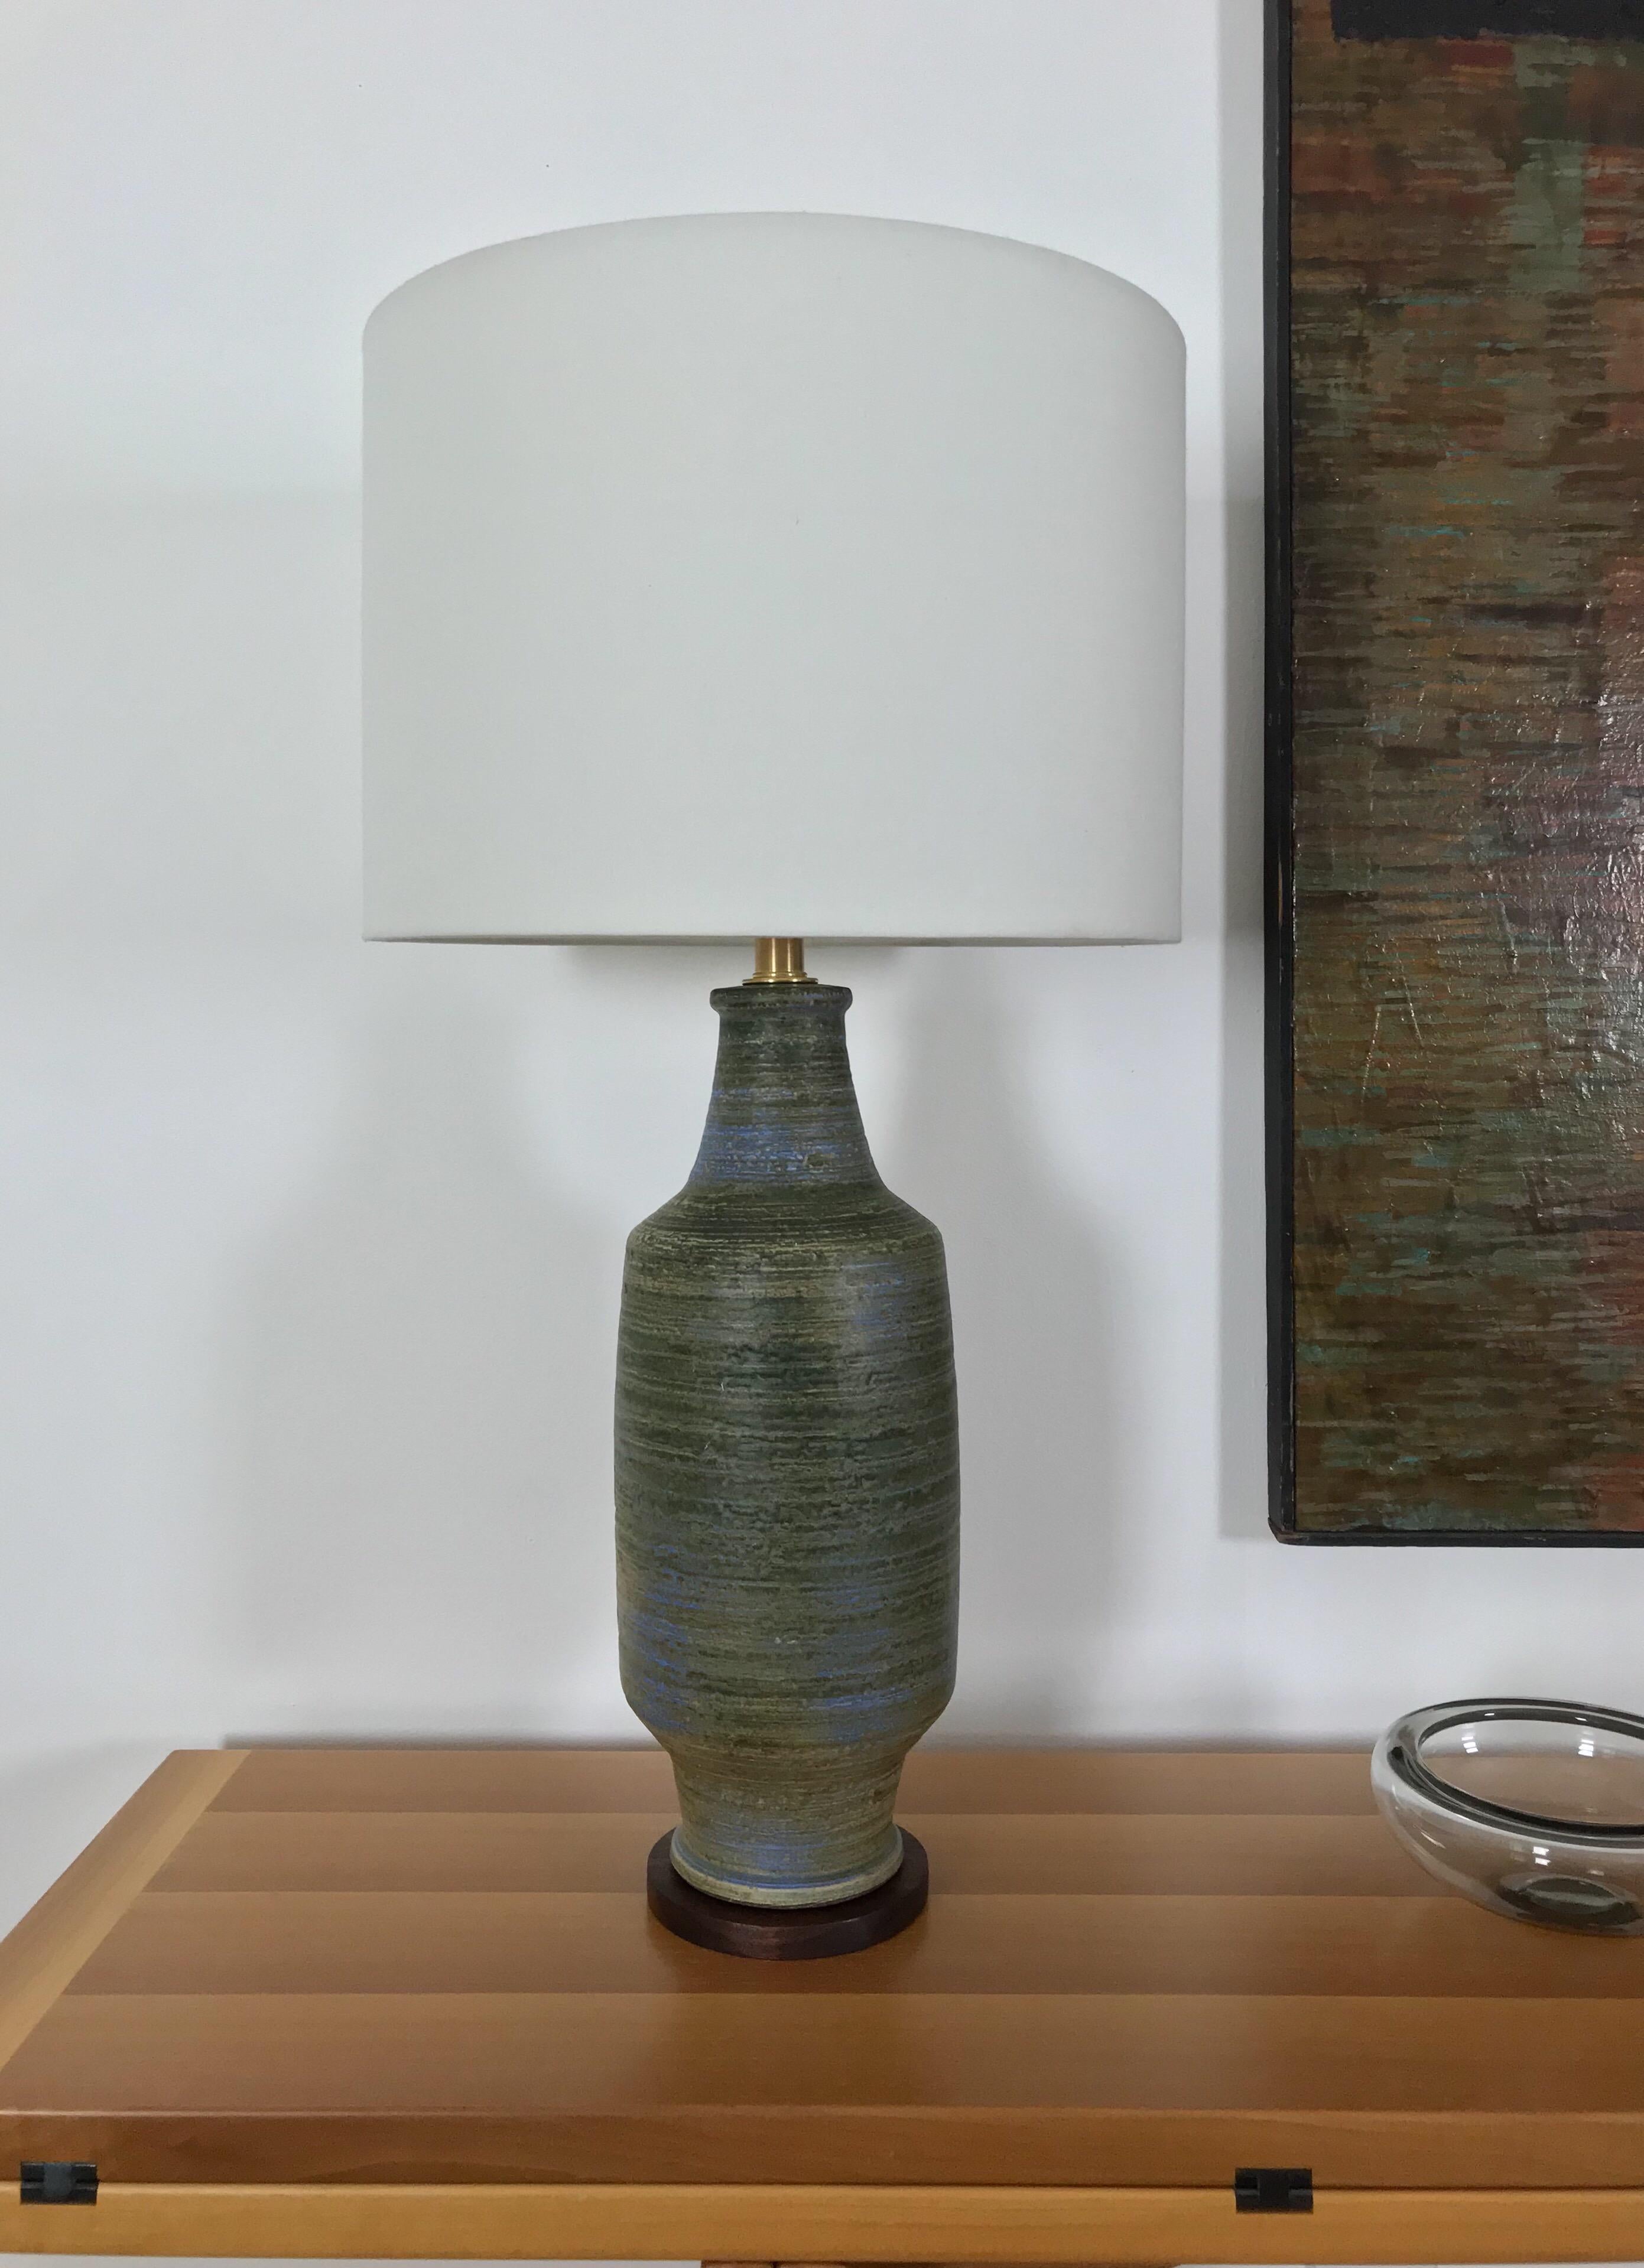 A vintage ceramic lamp with a solid walnut base designed by Lee Rosen for Design Technics. The early lamps had a paper label near the cord hole, so I believe this lamp is from the late 1950s, early 1960s. The lamp has been taken apart and cleaned,